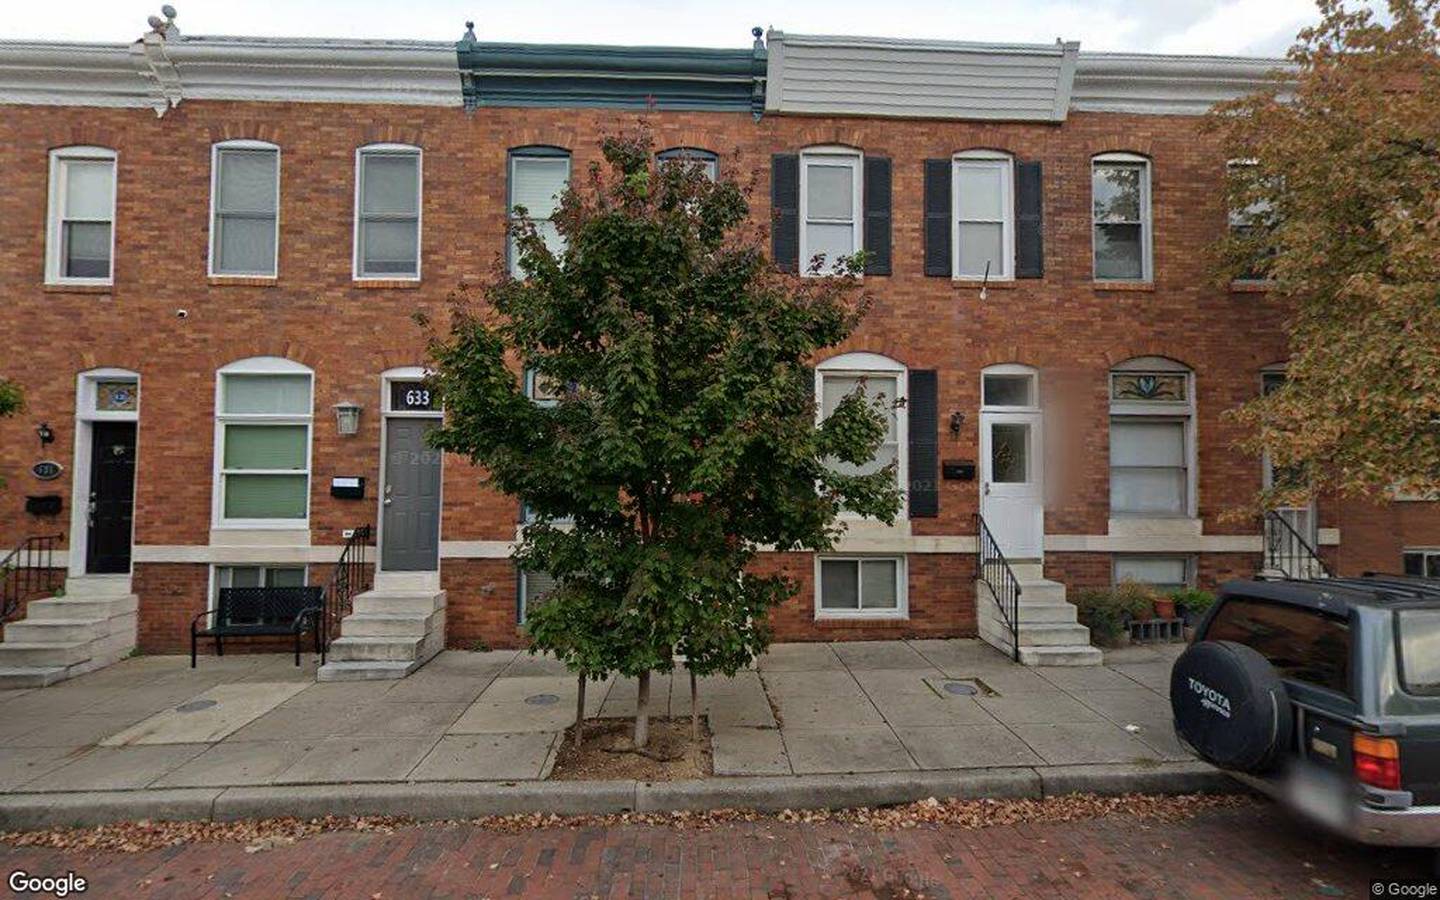 $495,000, townhouse at 635 Lakewood Avenue 